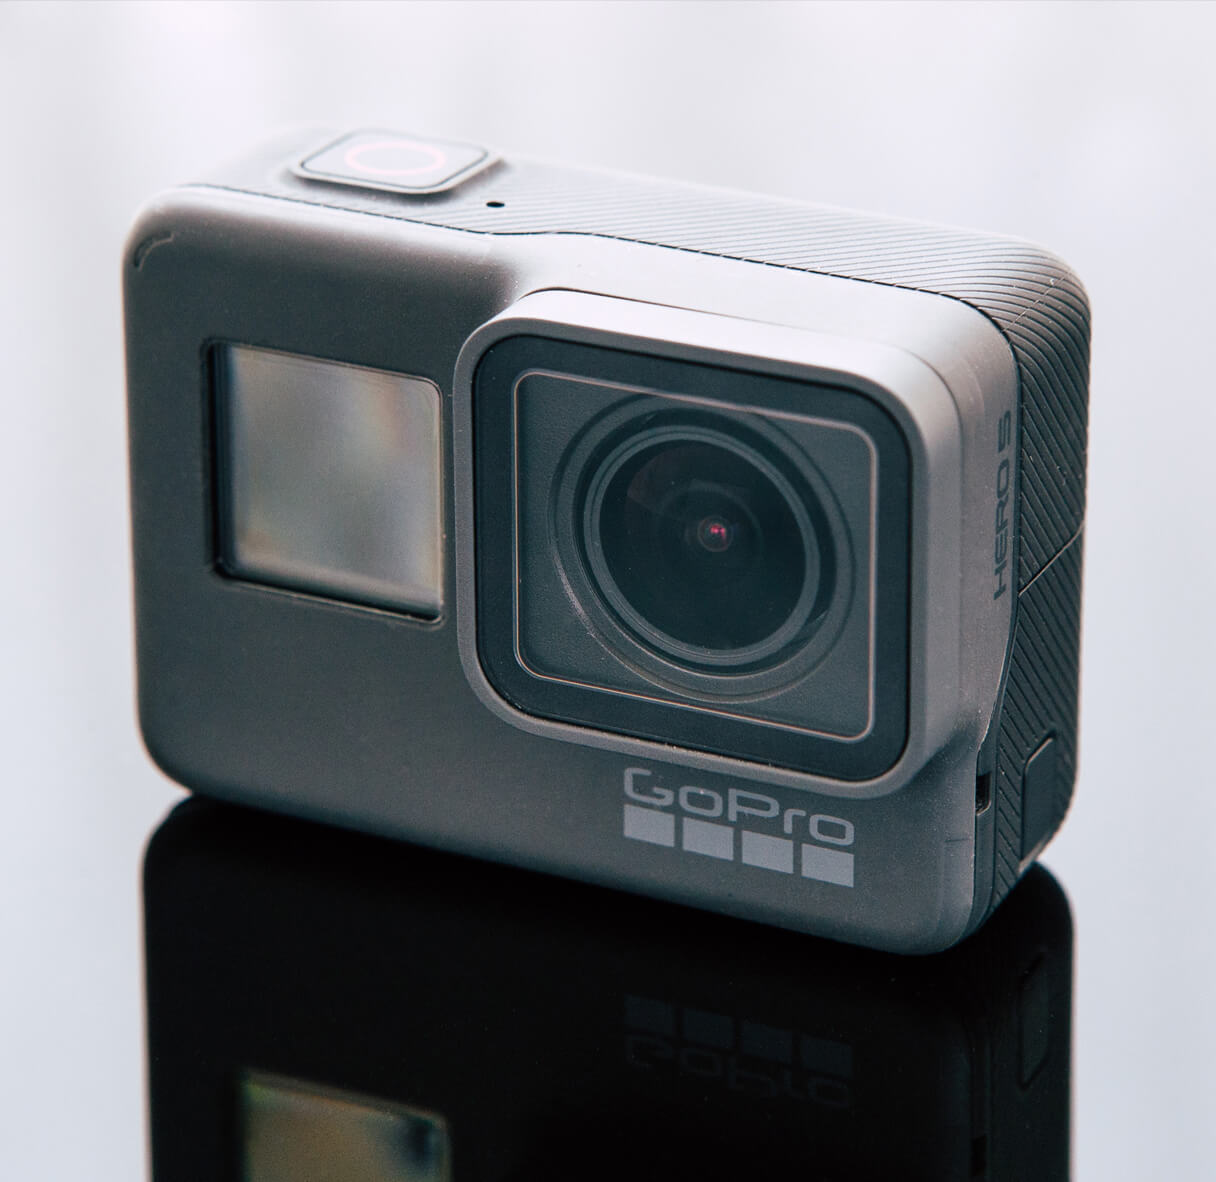 SA Mercantile Investigation Services. Debt Collection page image of a GoPro camera sitting on a table.